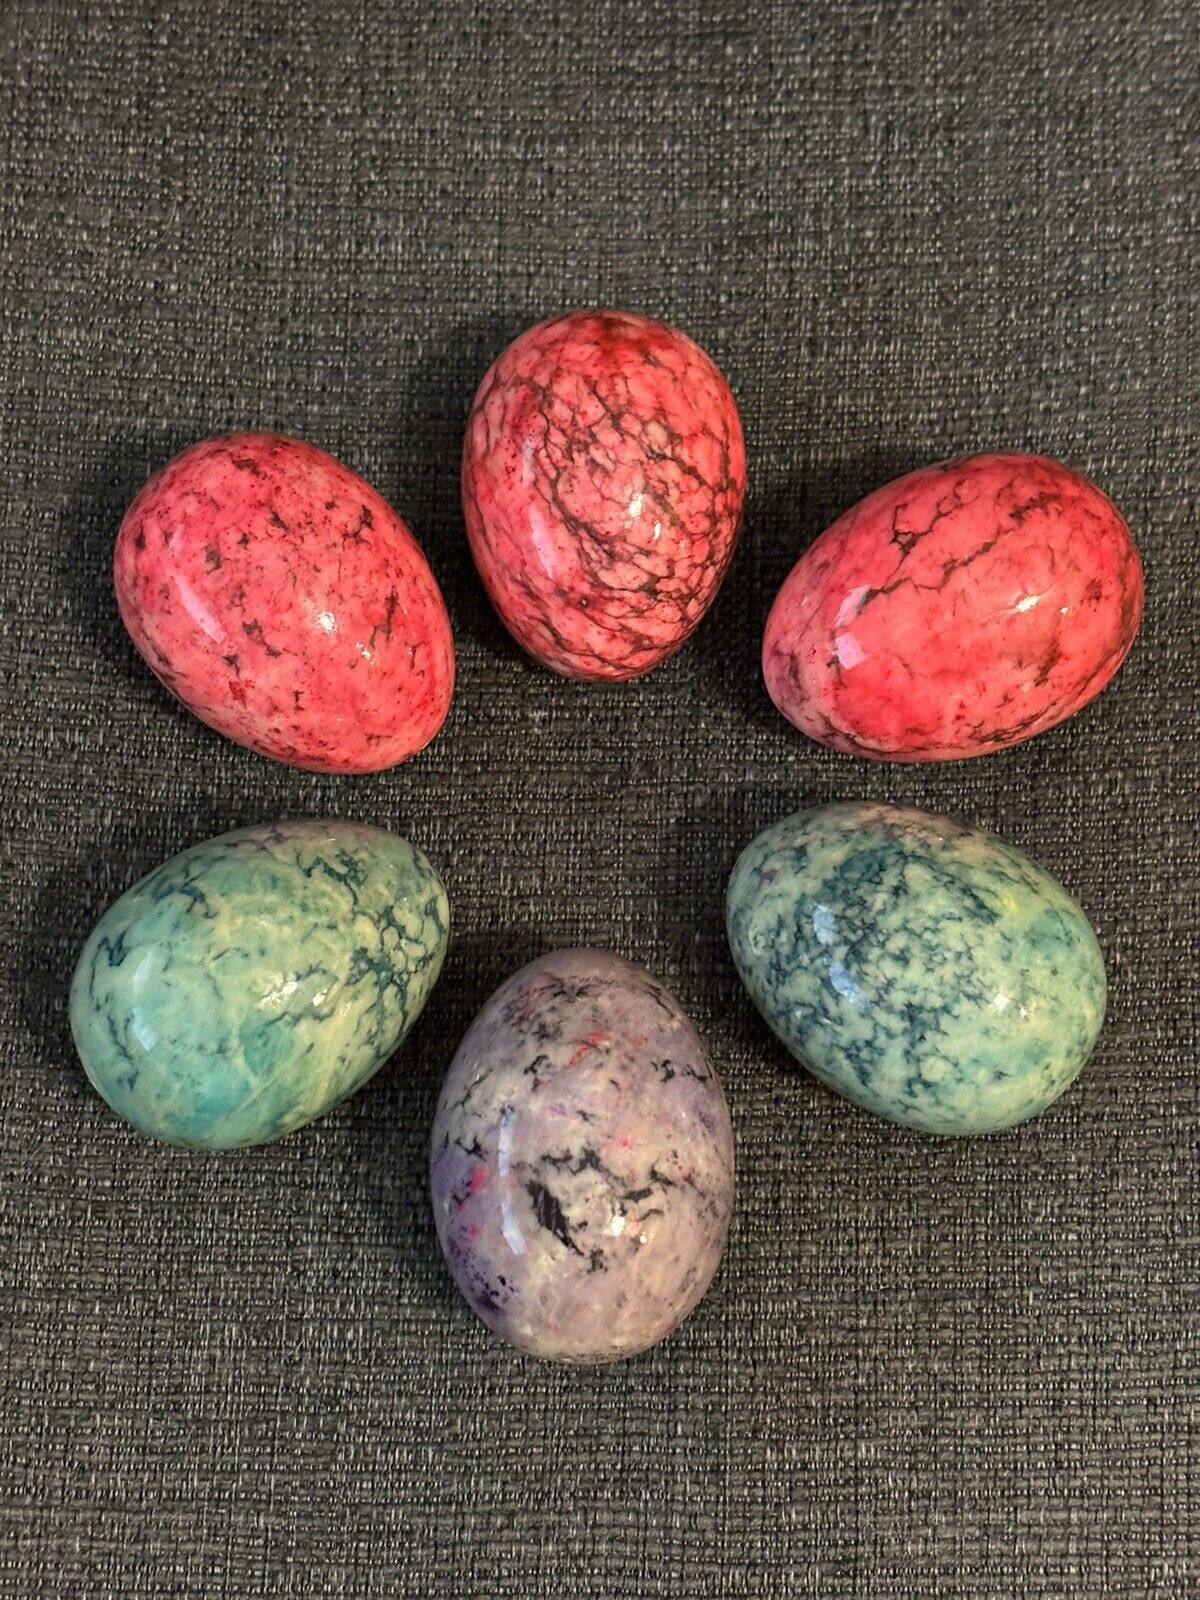 Lot of 6 Polished Stone Marble Eggs Pink Green Purple Easter Decoration